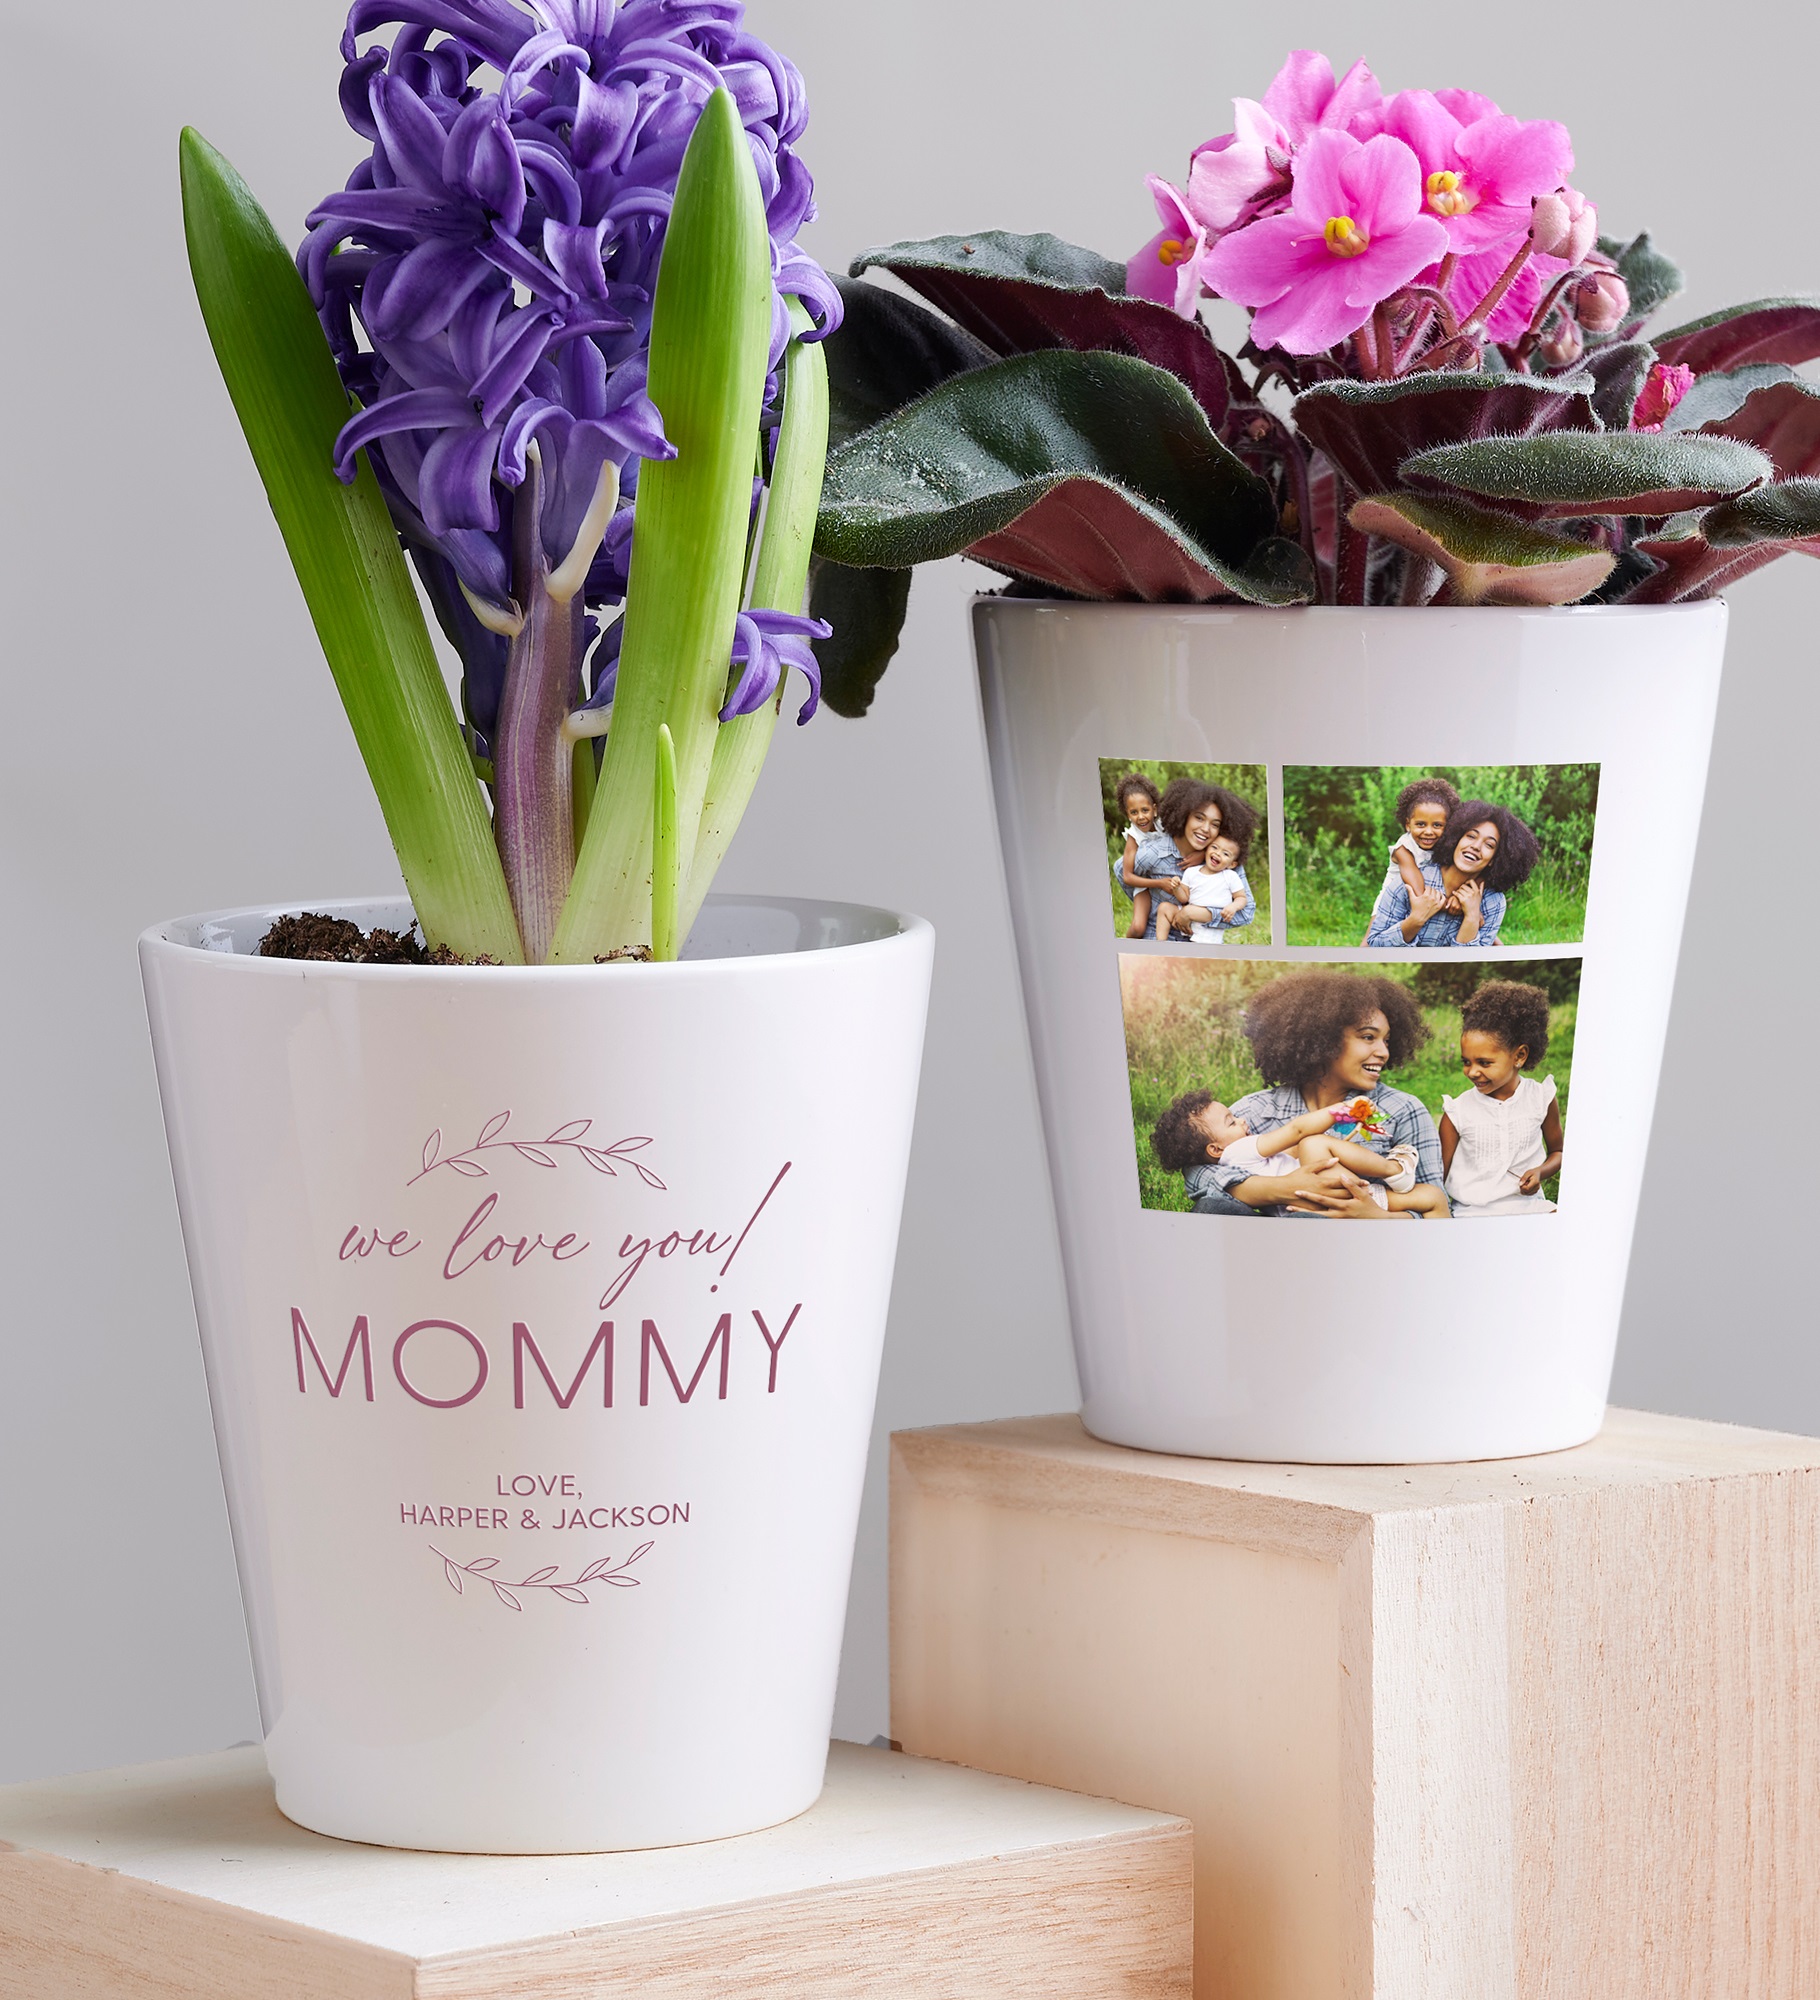 Her Memories Photo Collage Personalized Mini Flower Pot